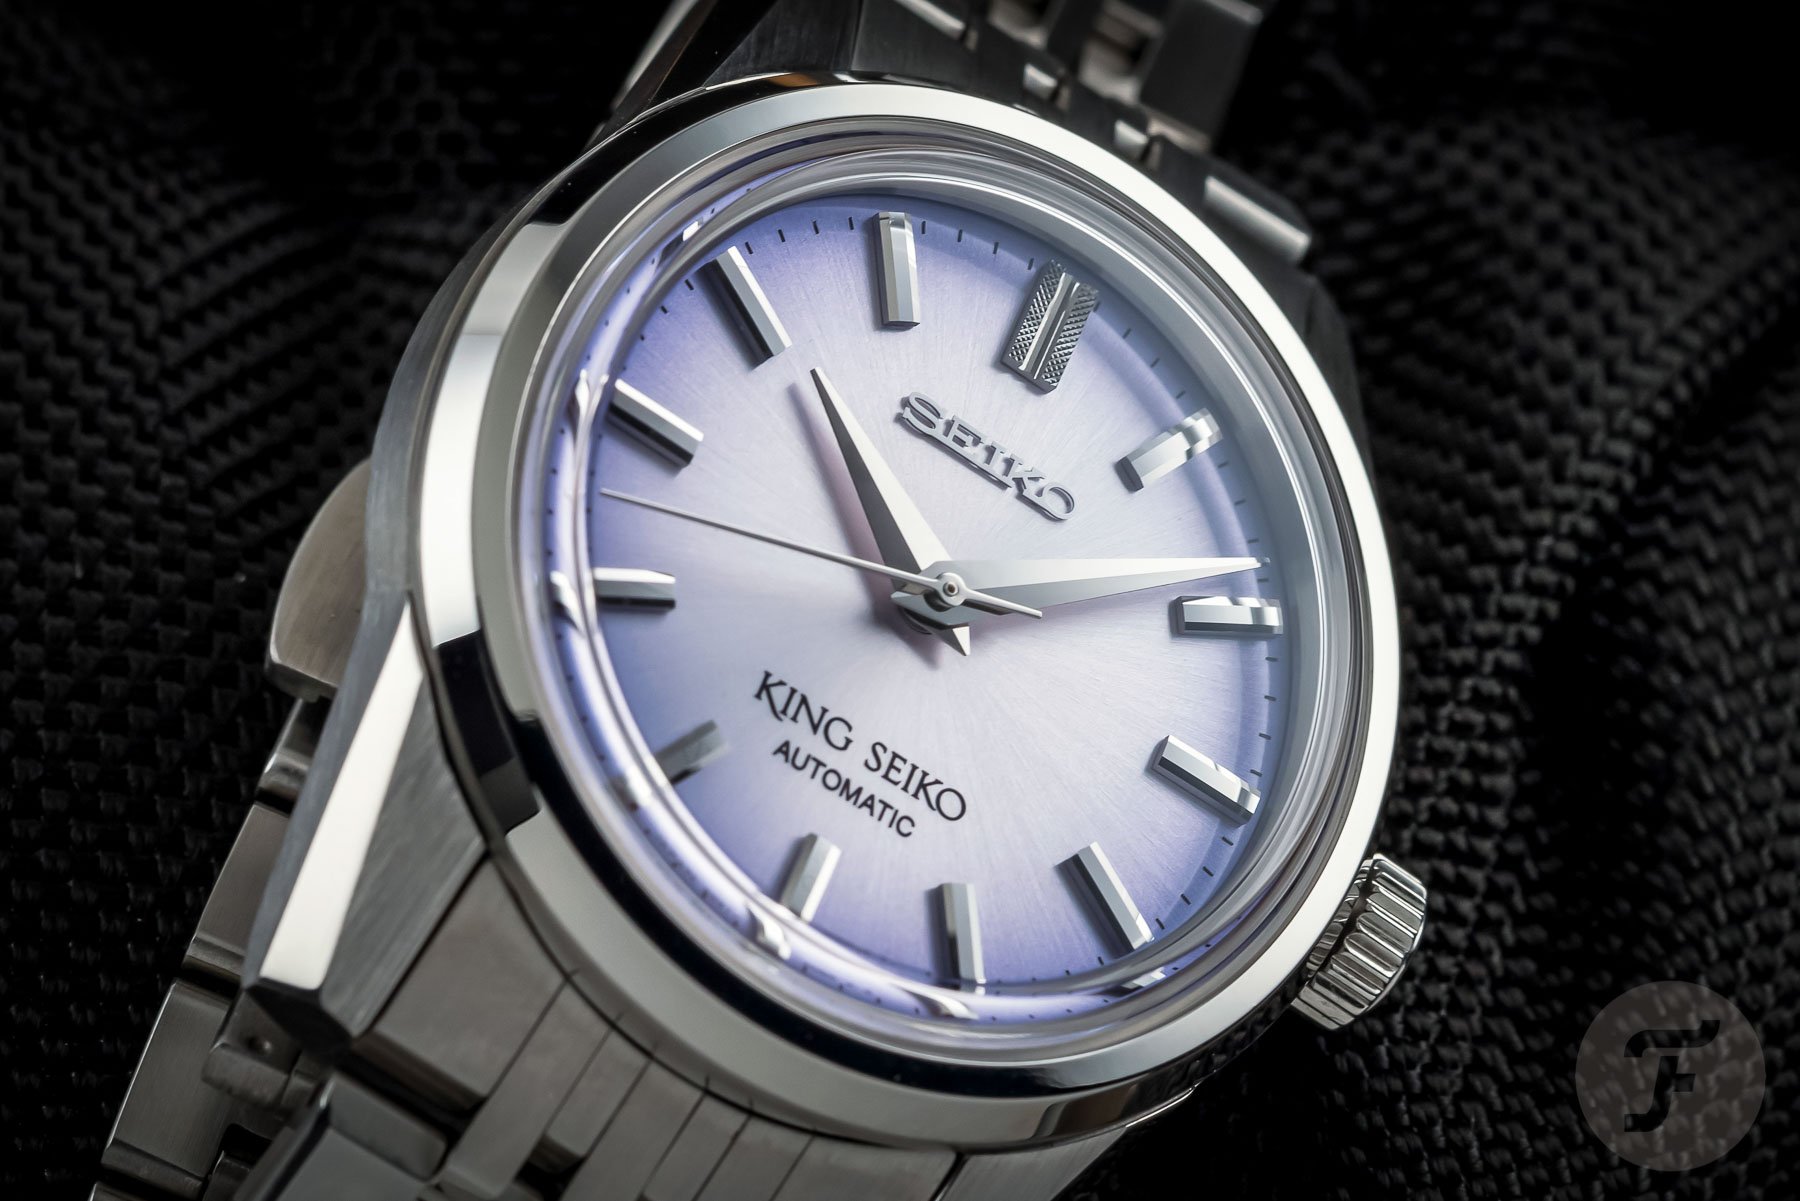 F】 Comparing The 37mm and 39mm King Seiko Models